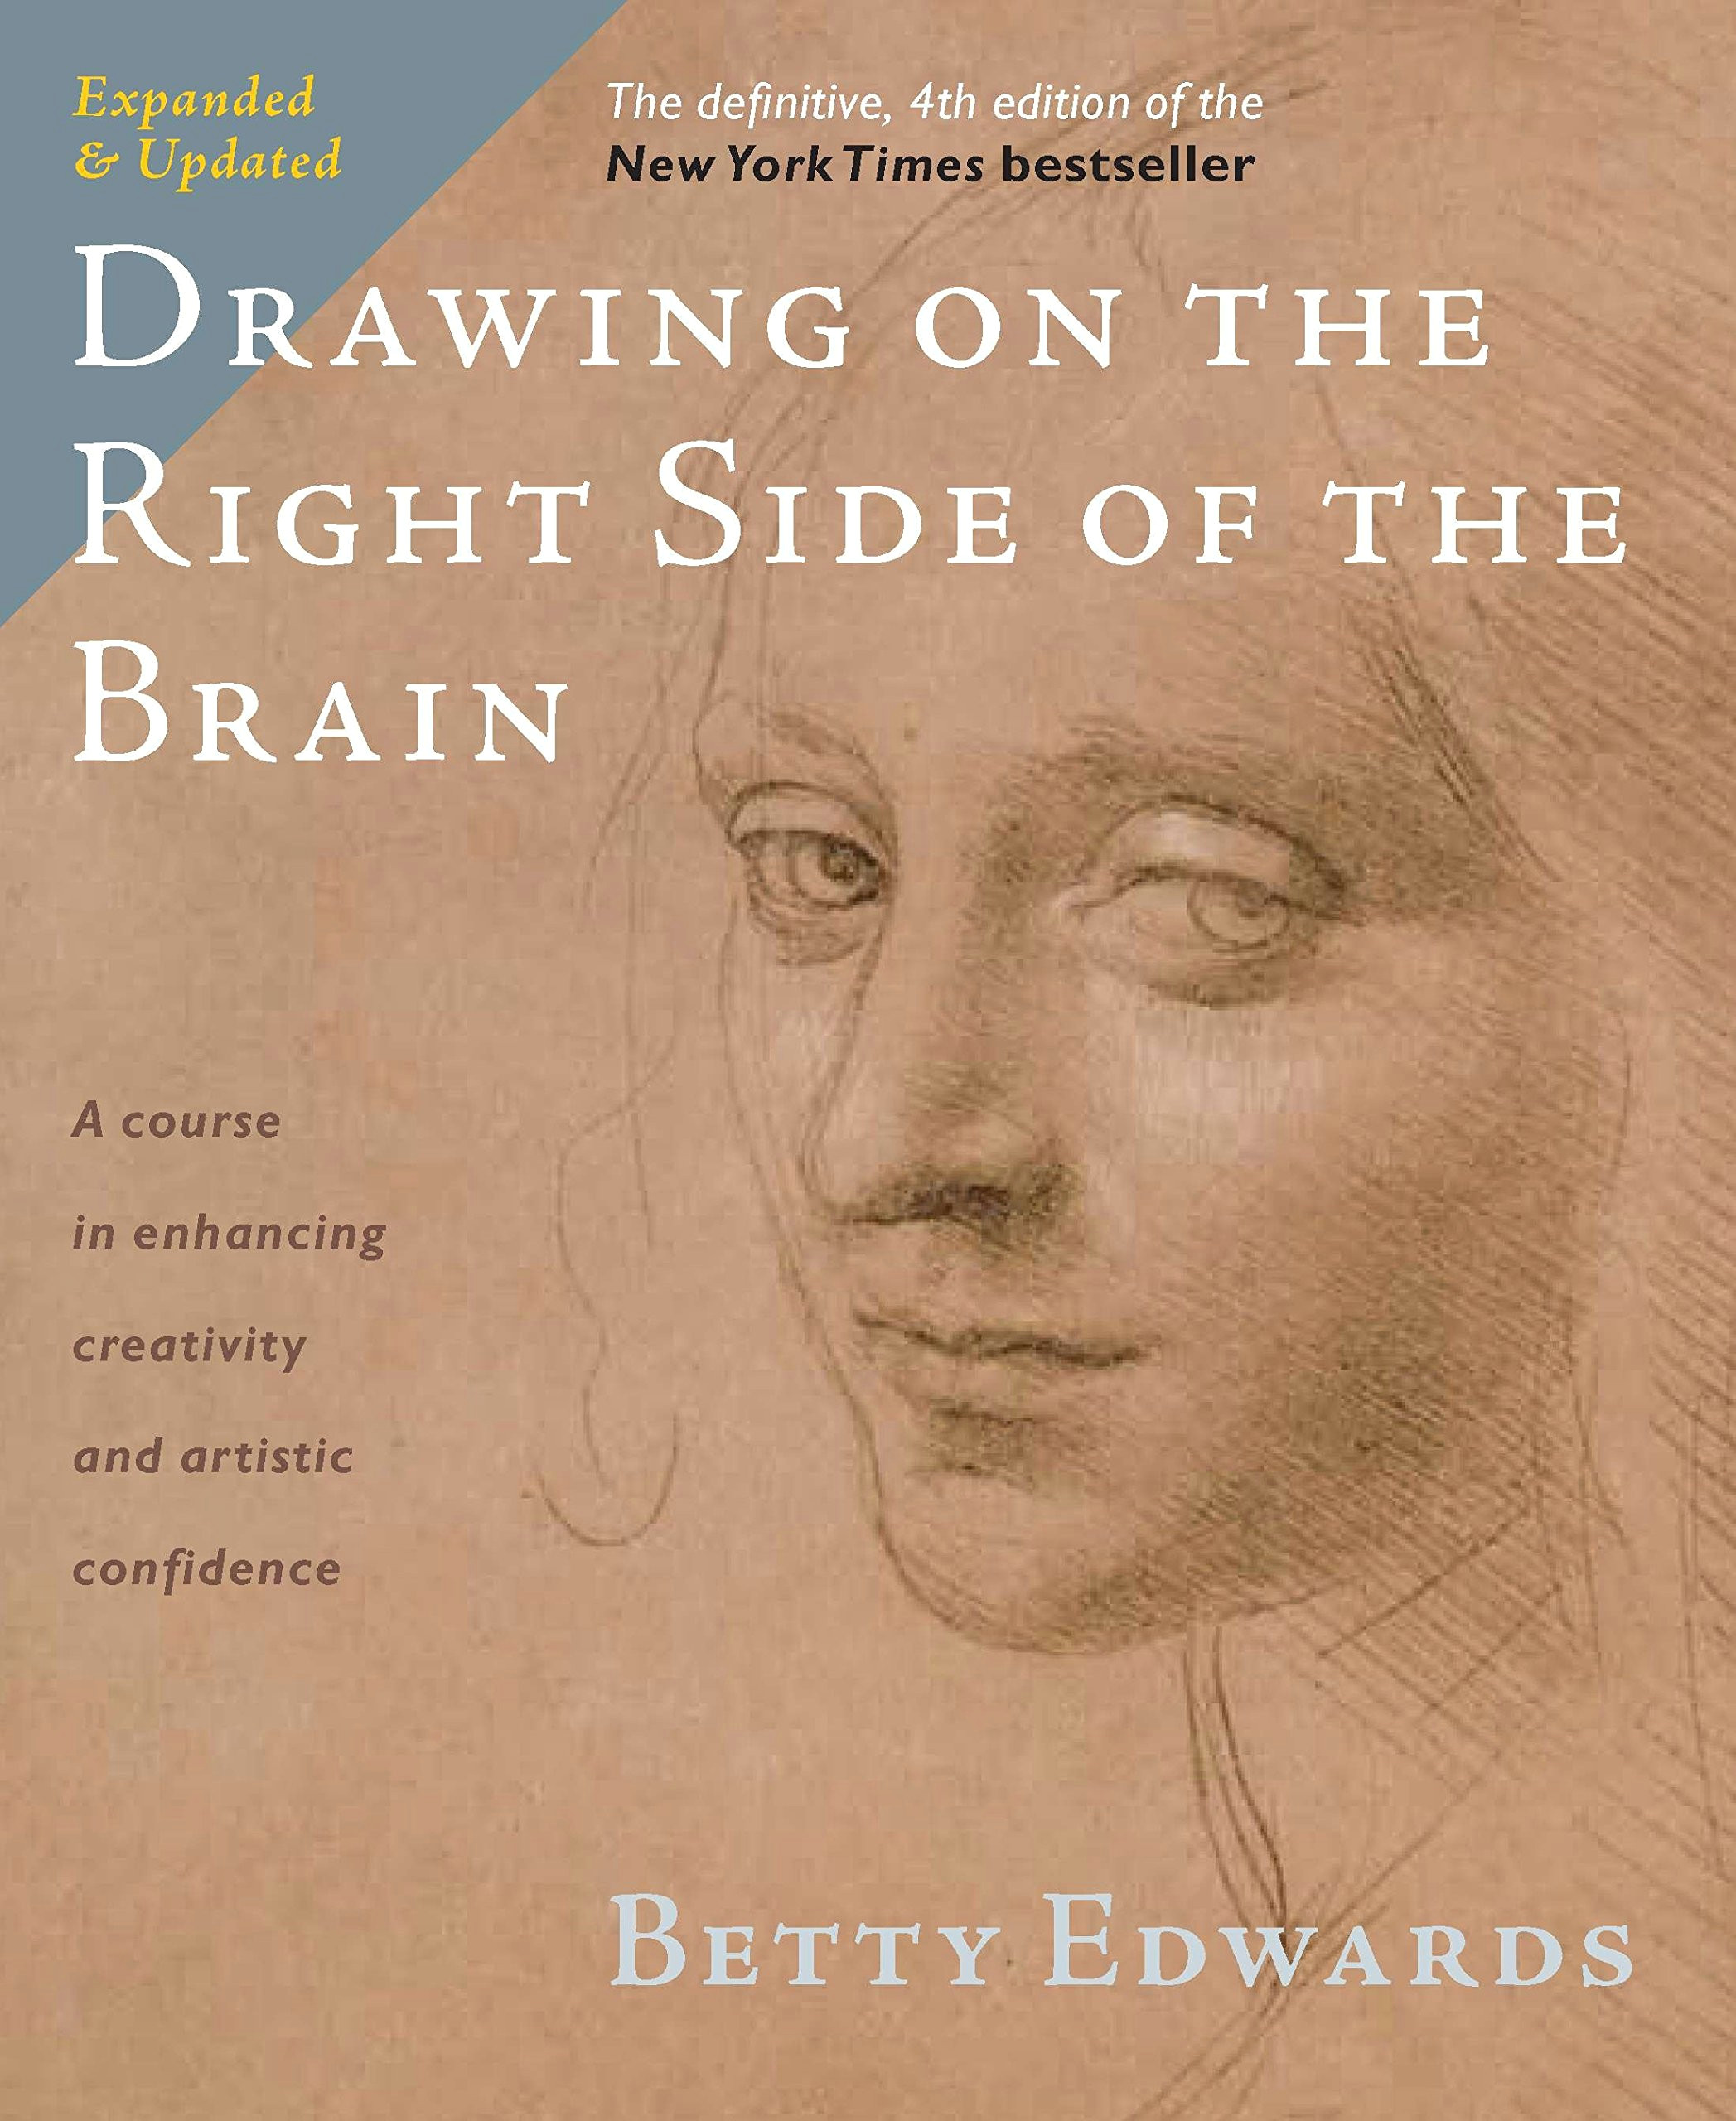 Class 9 Drawing Book Drawing On the Right Side Of the Brain the Definitive 4th Edition